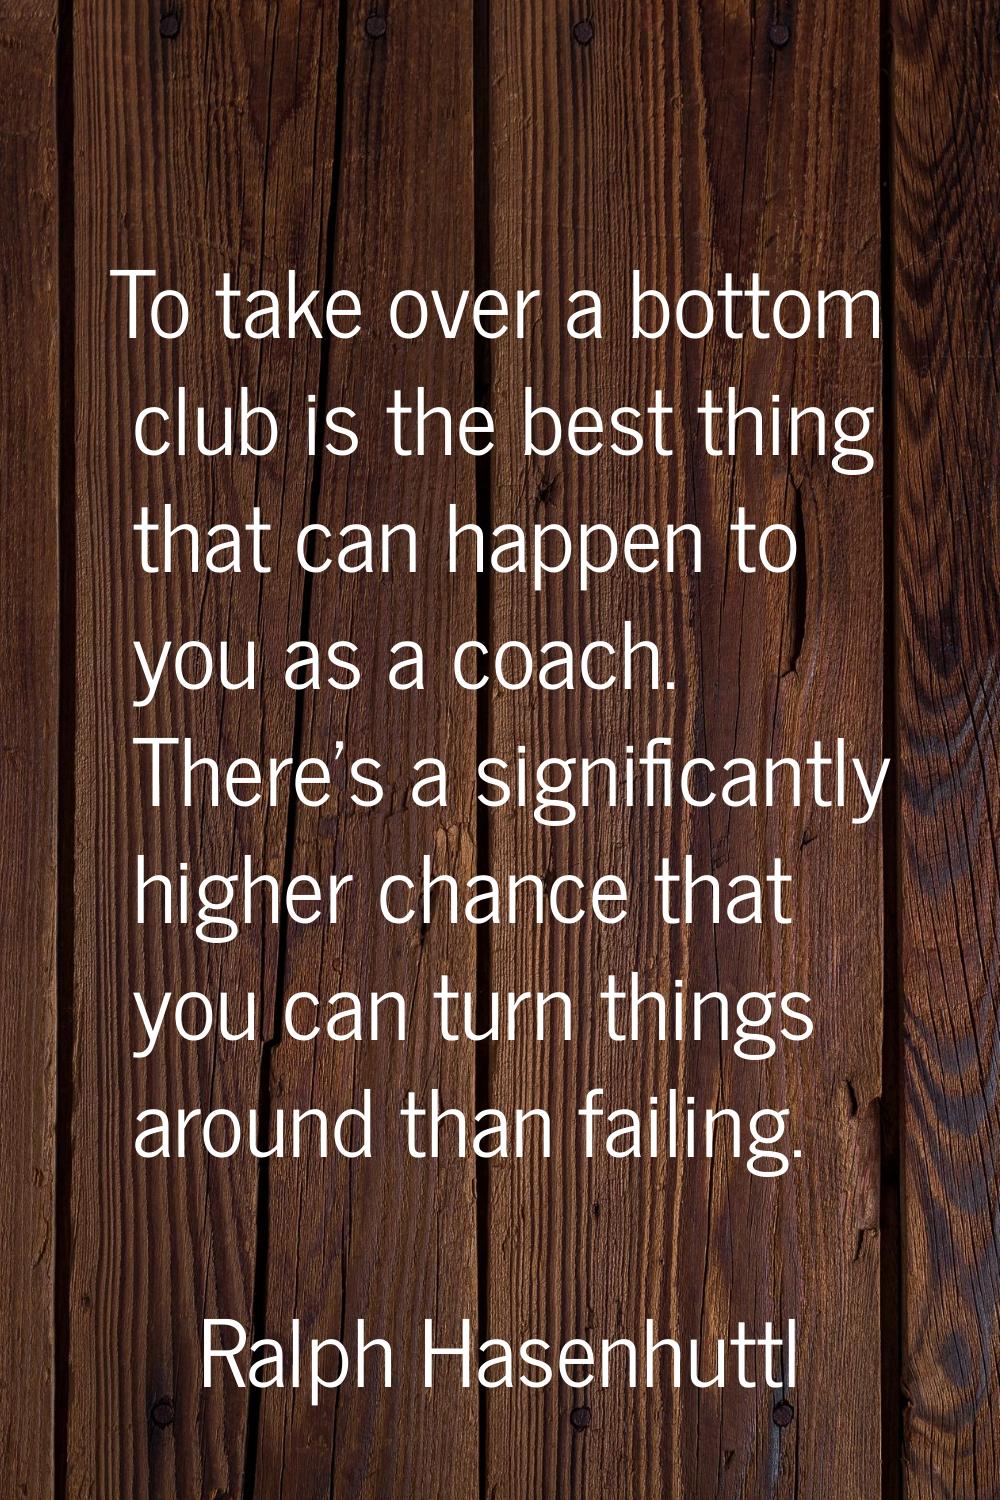 To take over a bottom club is the best thing that can happen to you as a coach. There's a significa